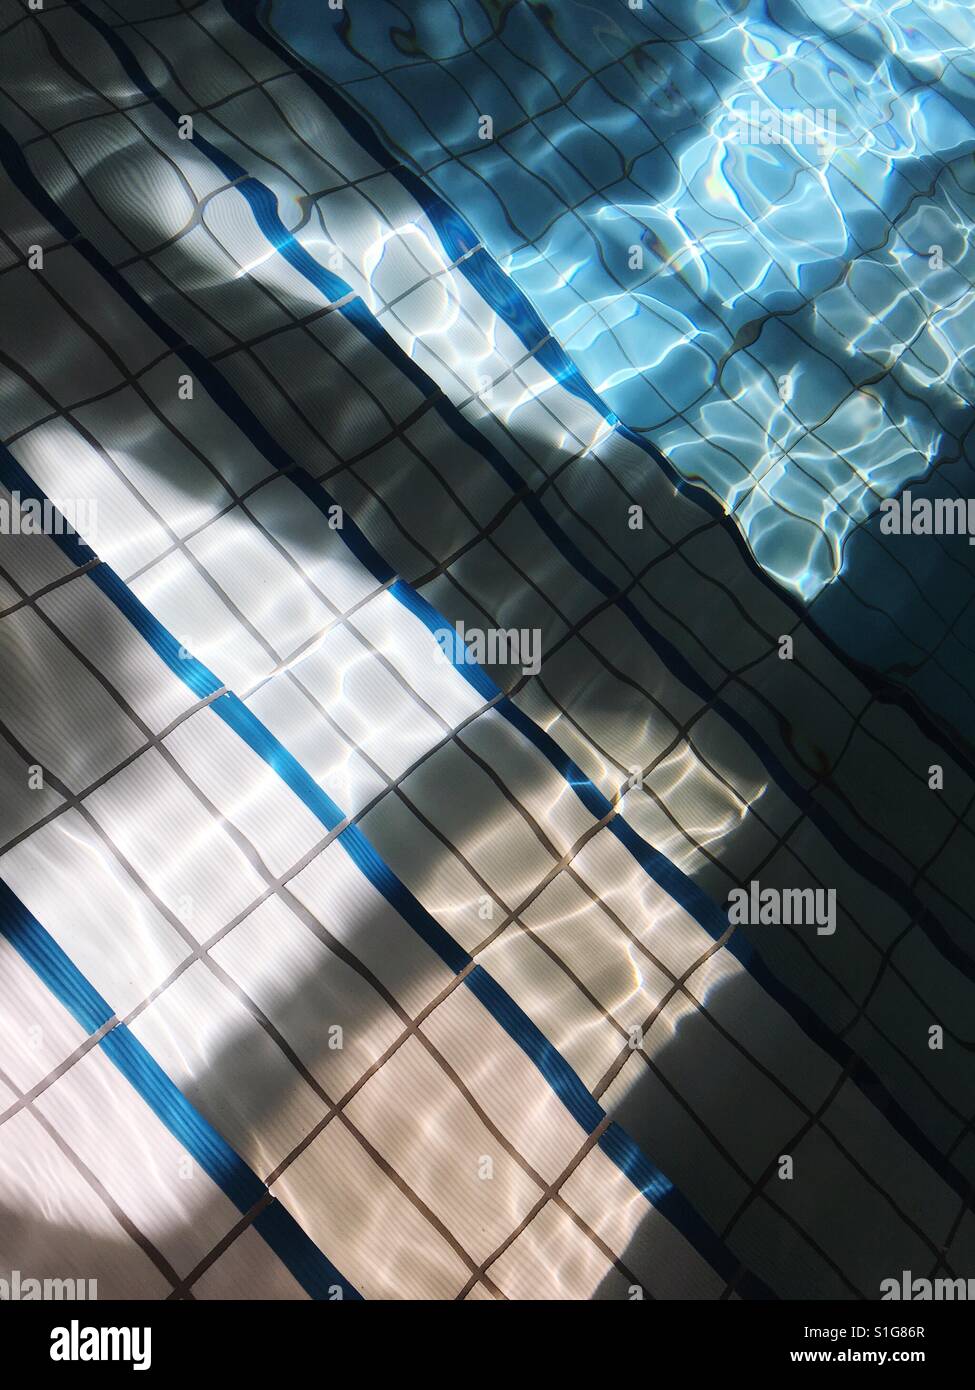 Light refractions on the steps of swimming pool Stock Photo